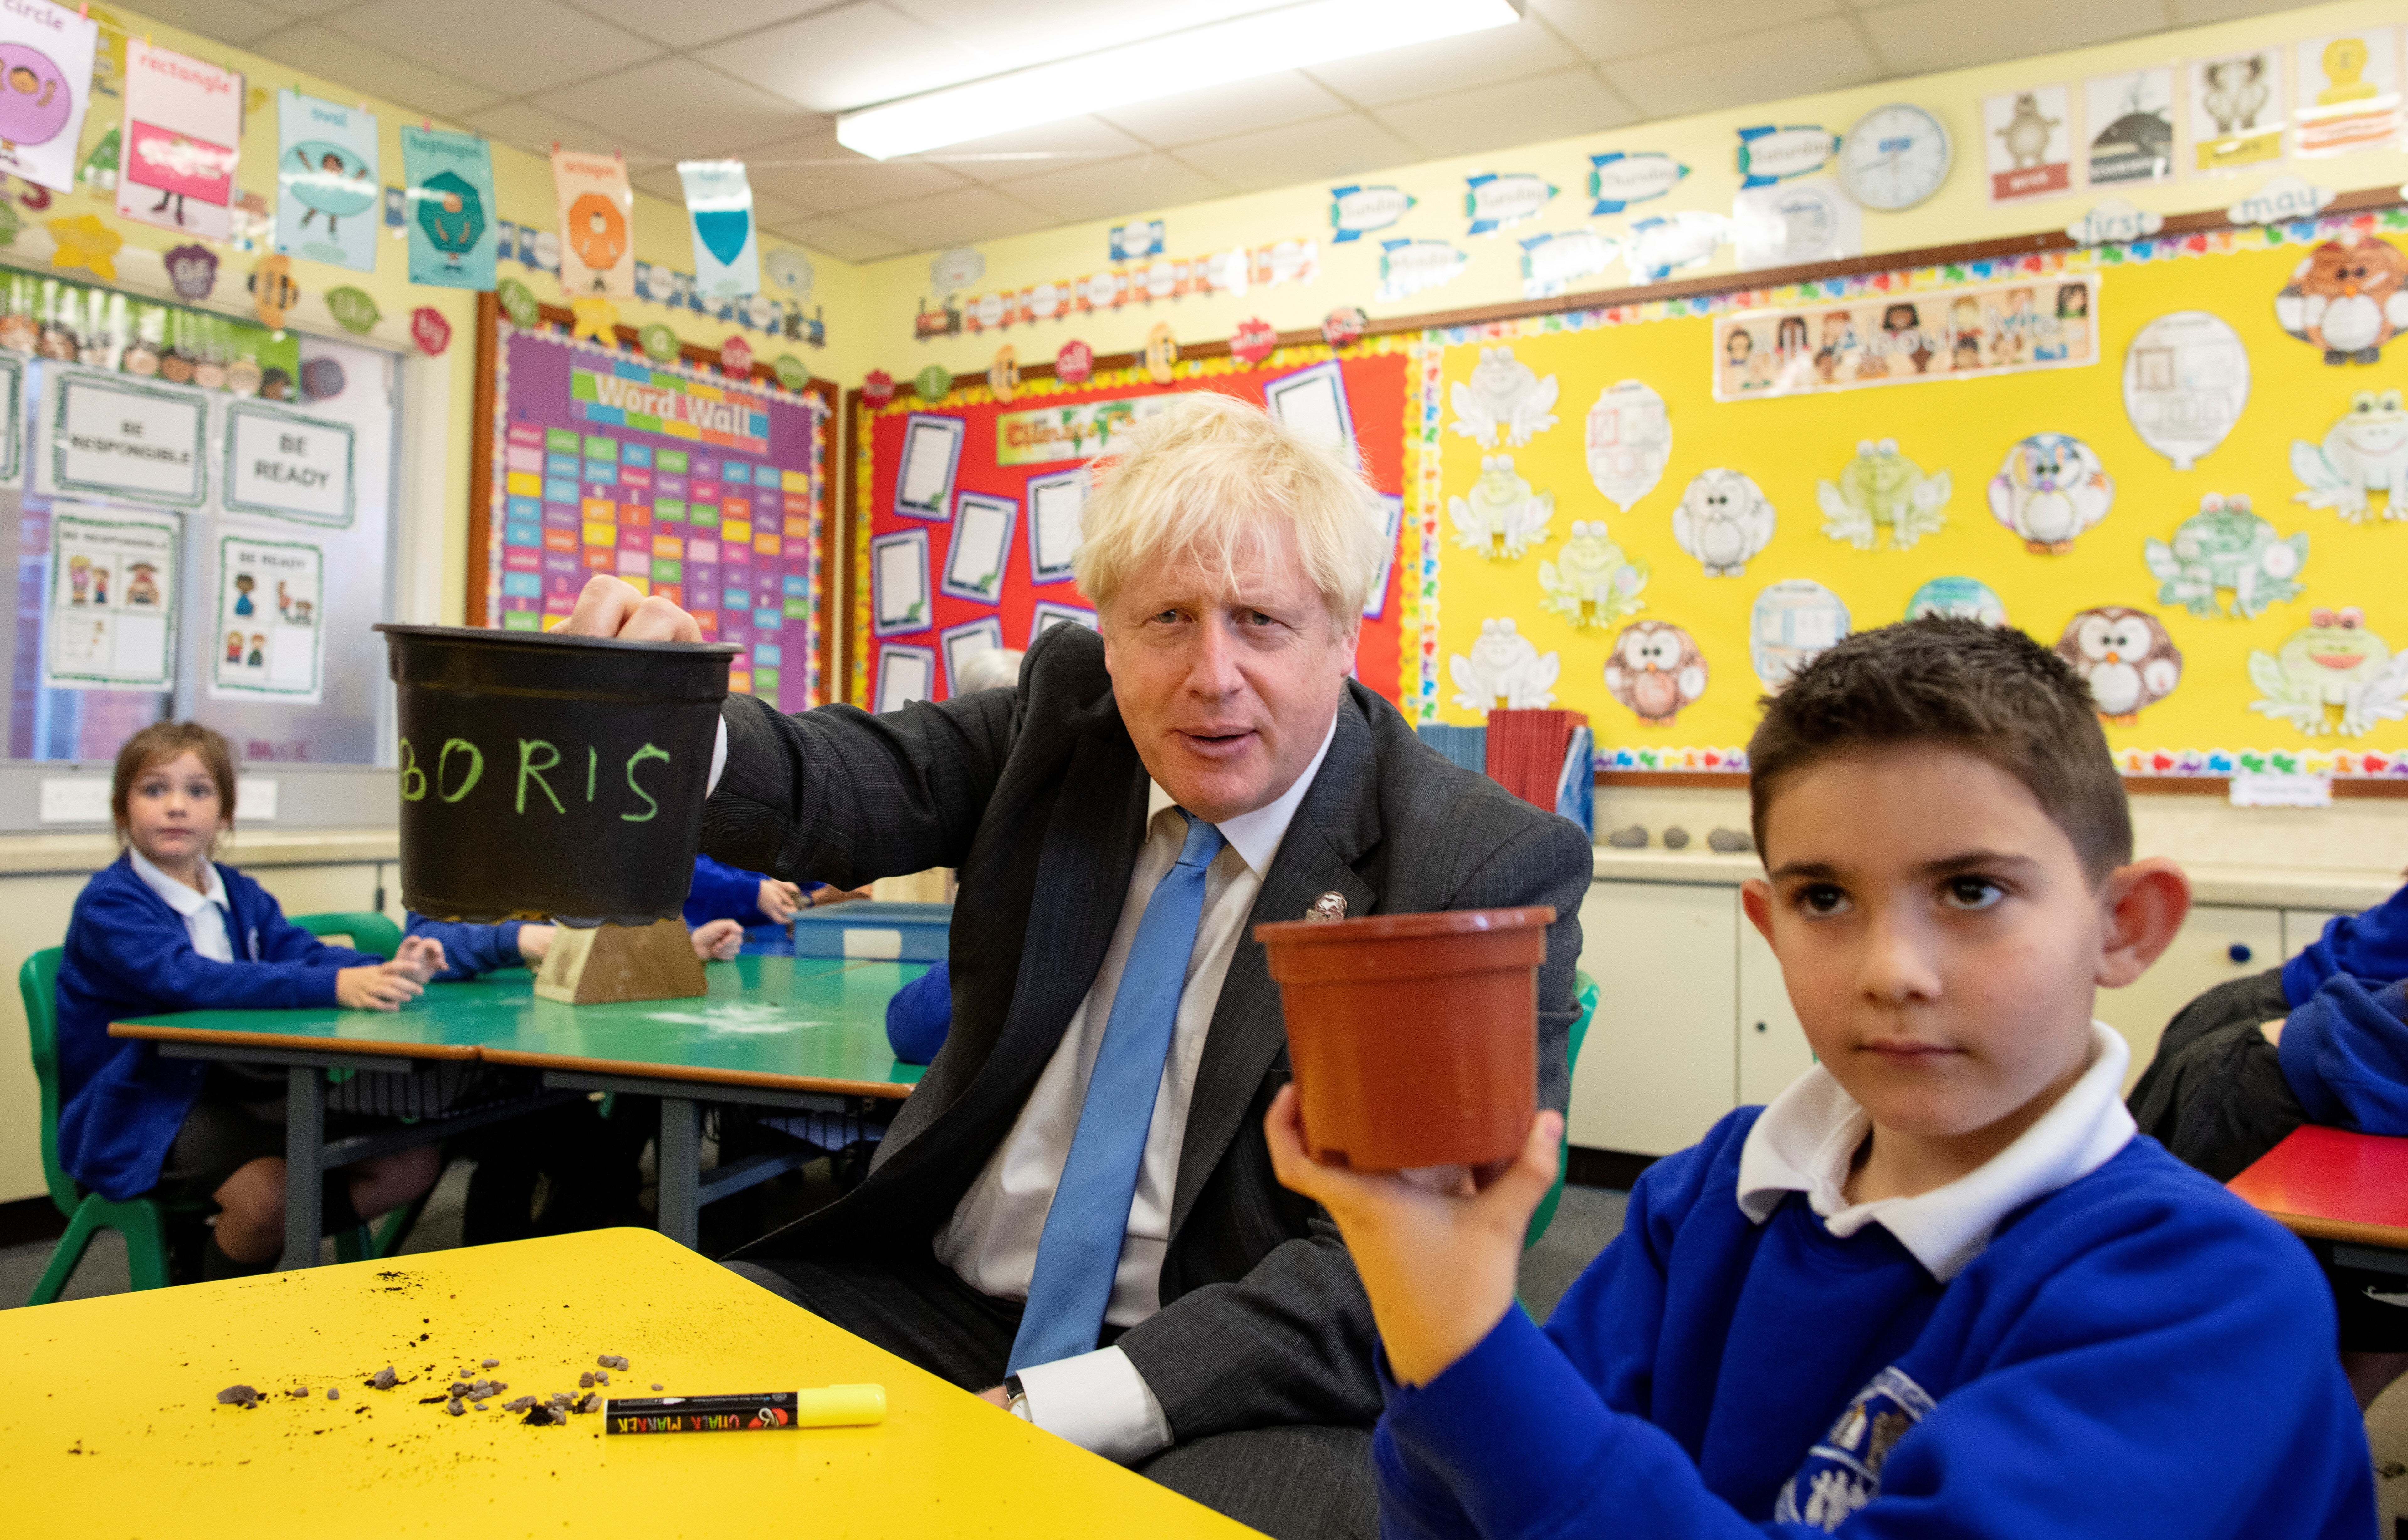 The princes were not the only dignitaries to visit Northern Ireland this year – Prime Minister Boris Johnson found time during the centenary events to join schoolchildren as they planted seeds during a visit to Crumlin Intergrated primary school in County Antrim in October (Paul Faith/PA)